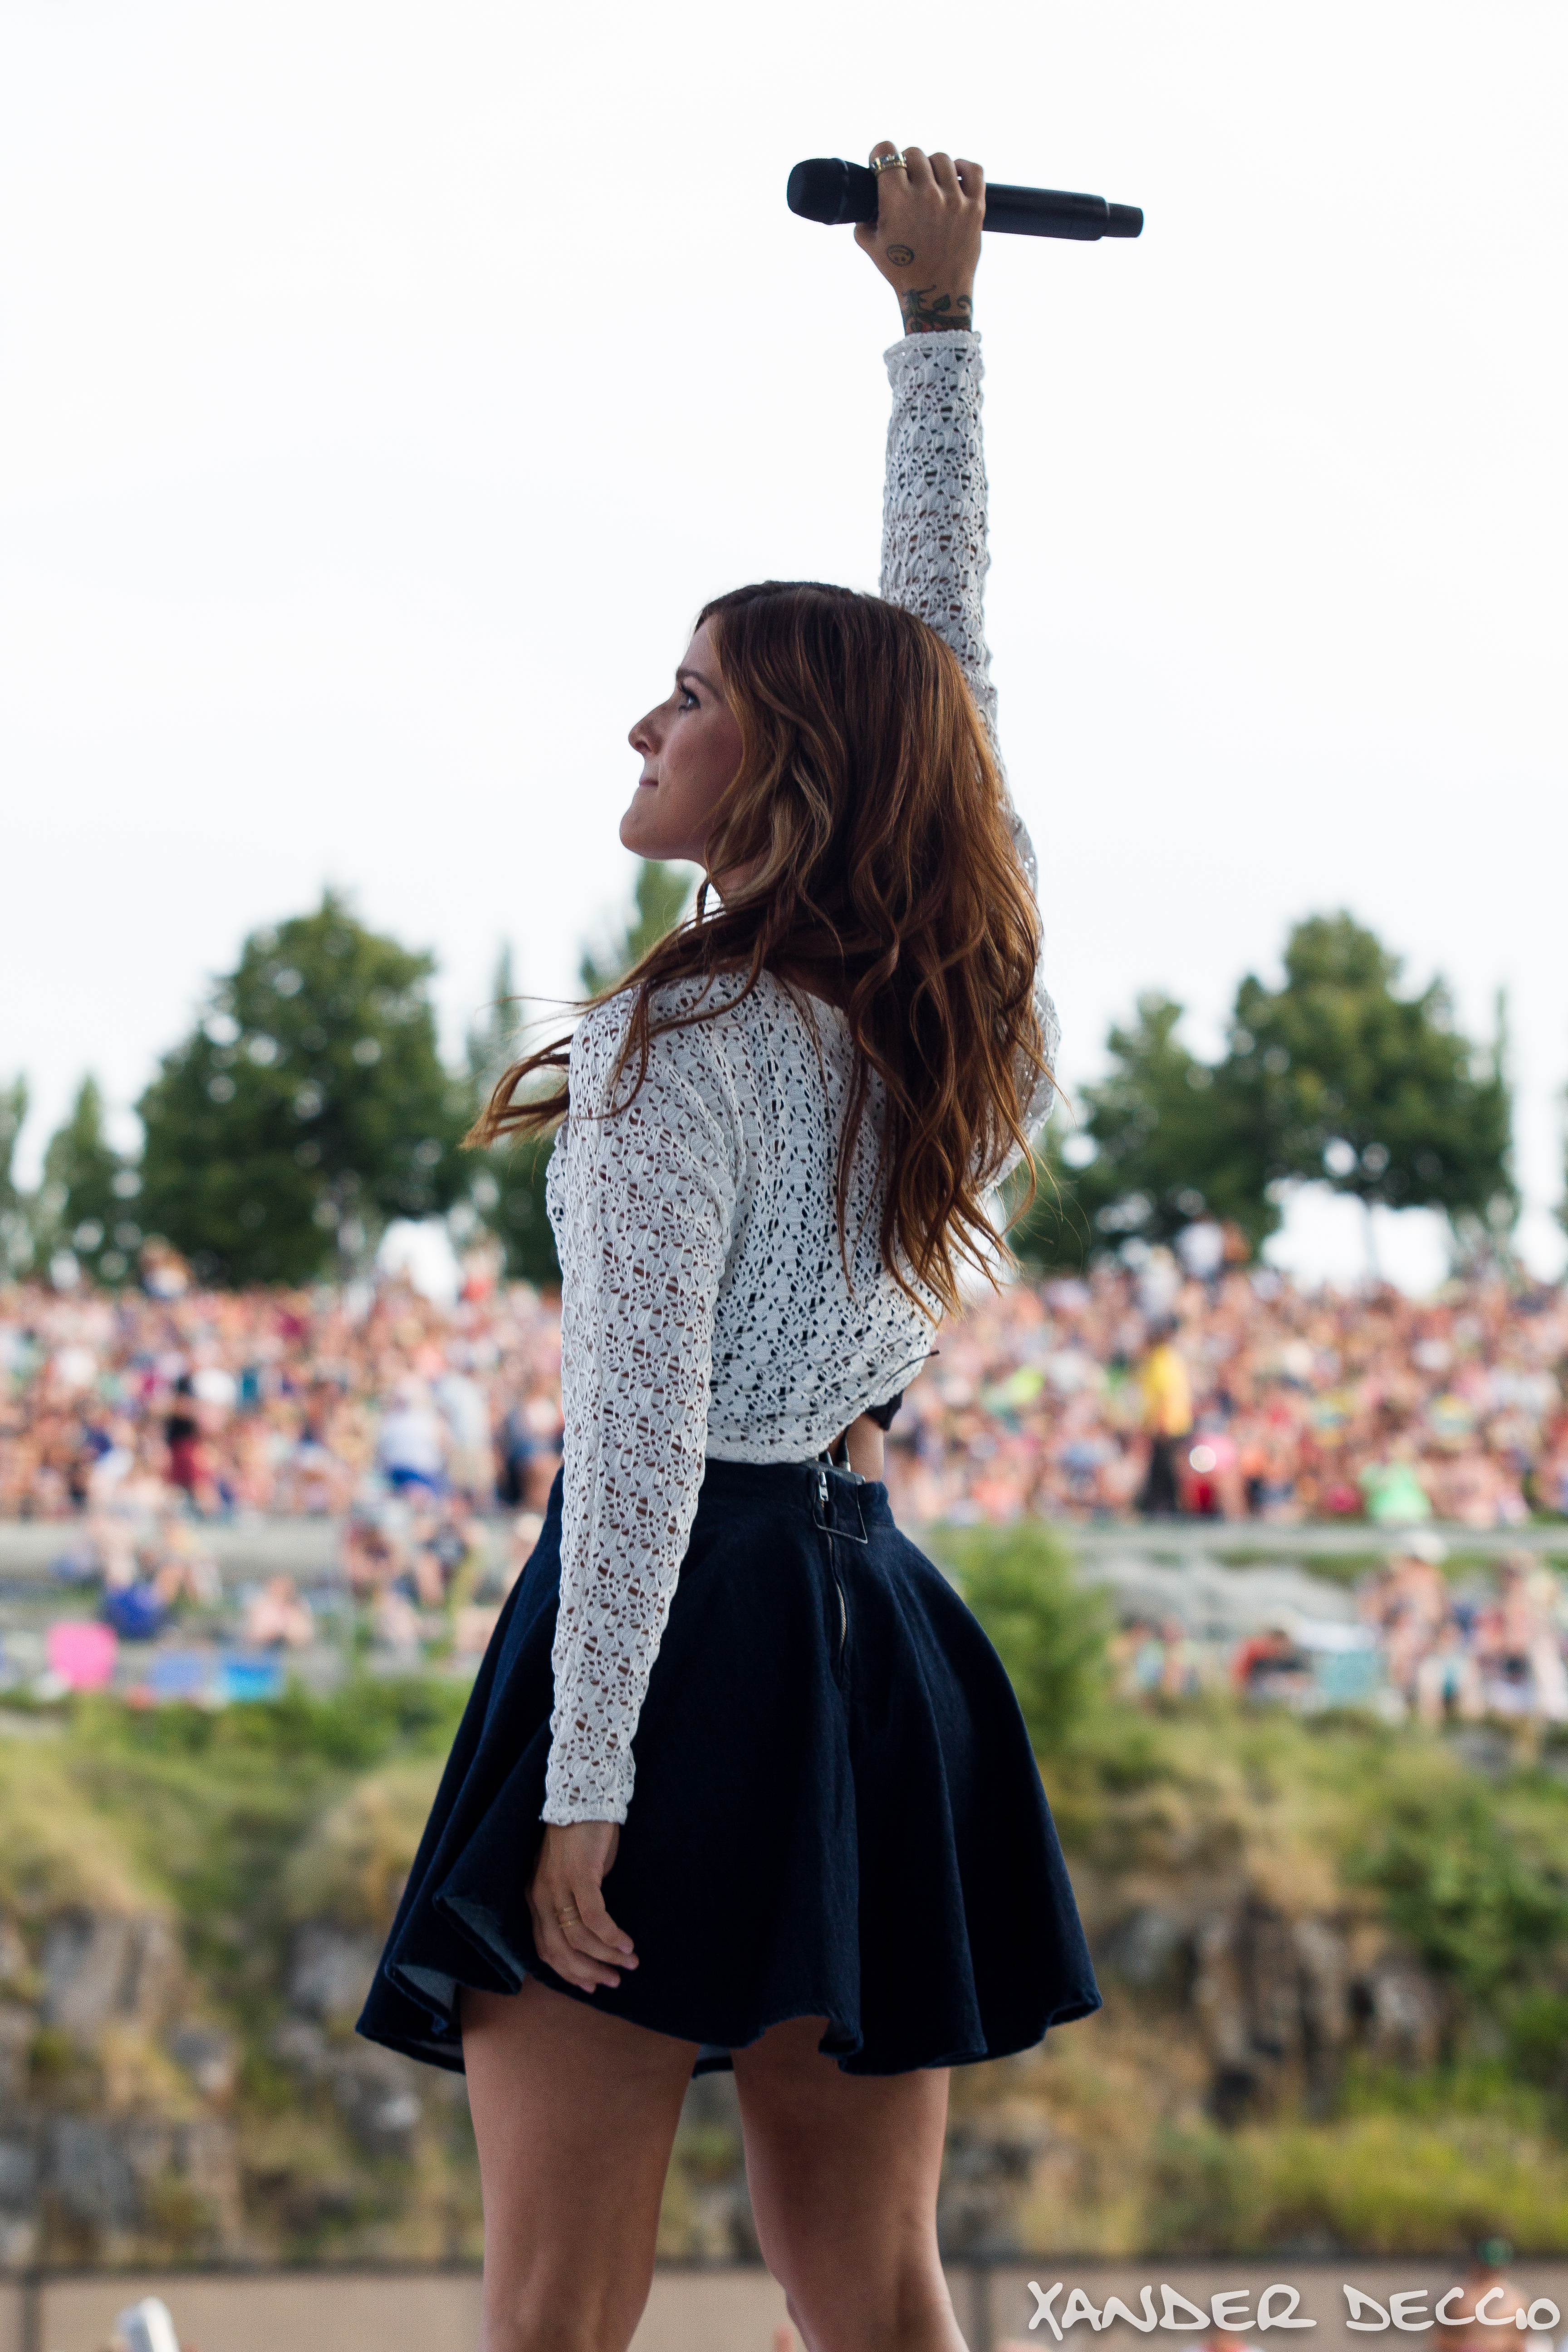 Cassadee Pope @ Watershed 2014 (Photo By Xander Deccio